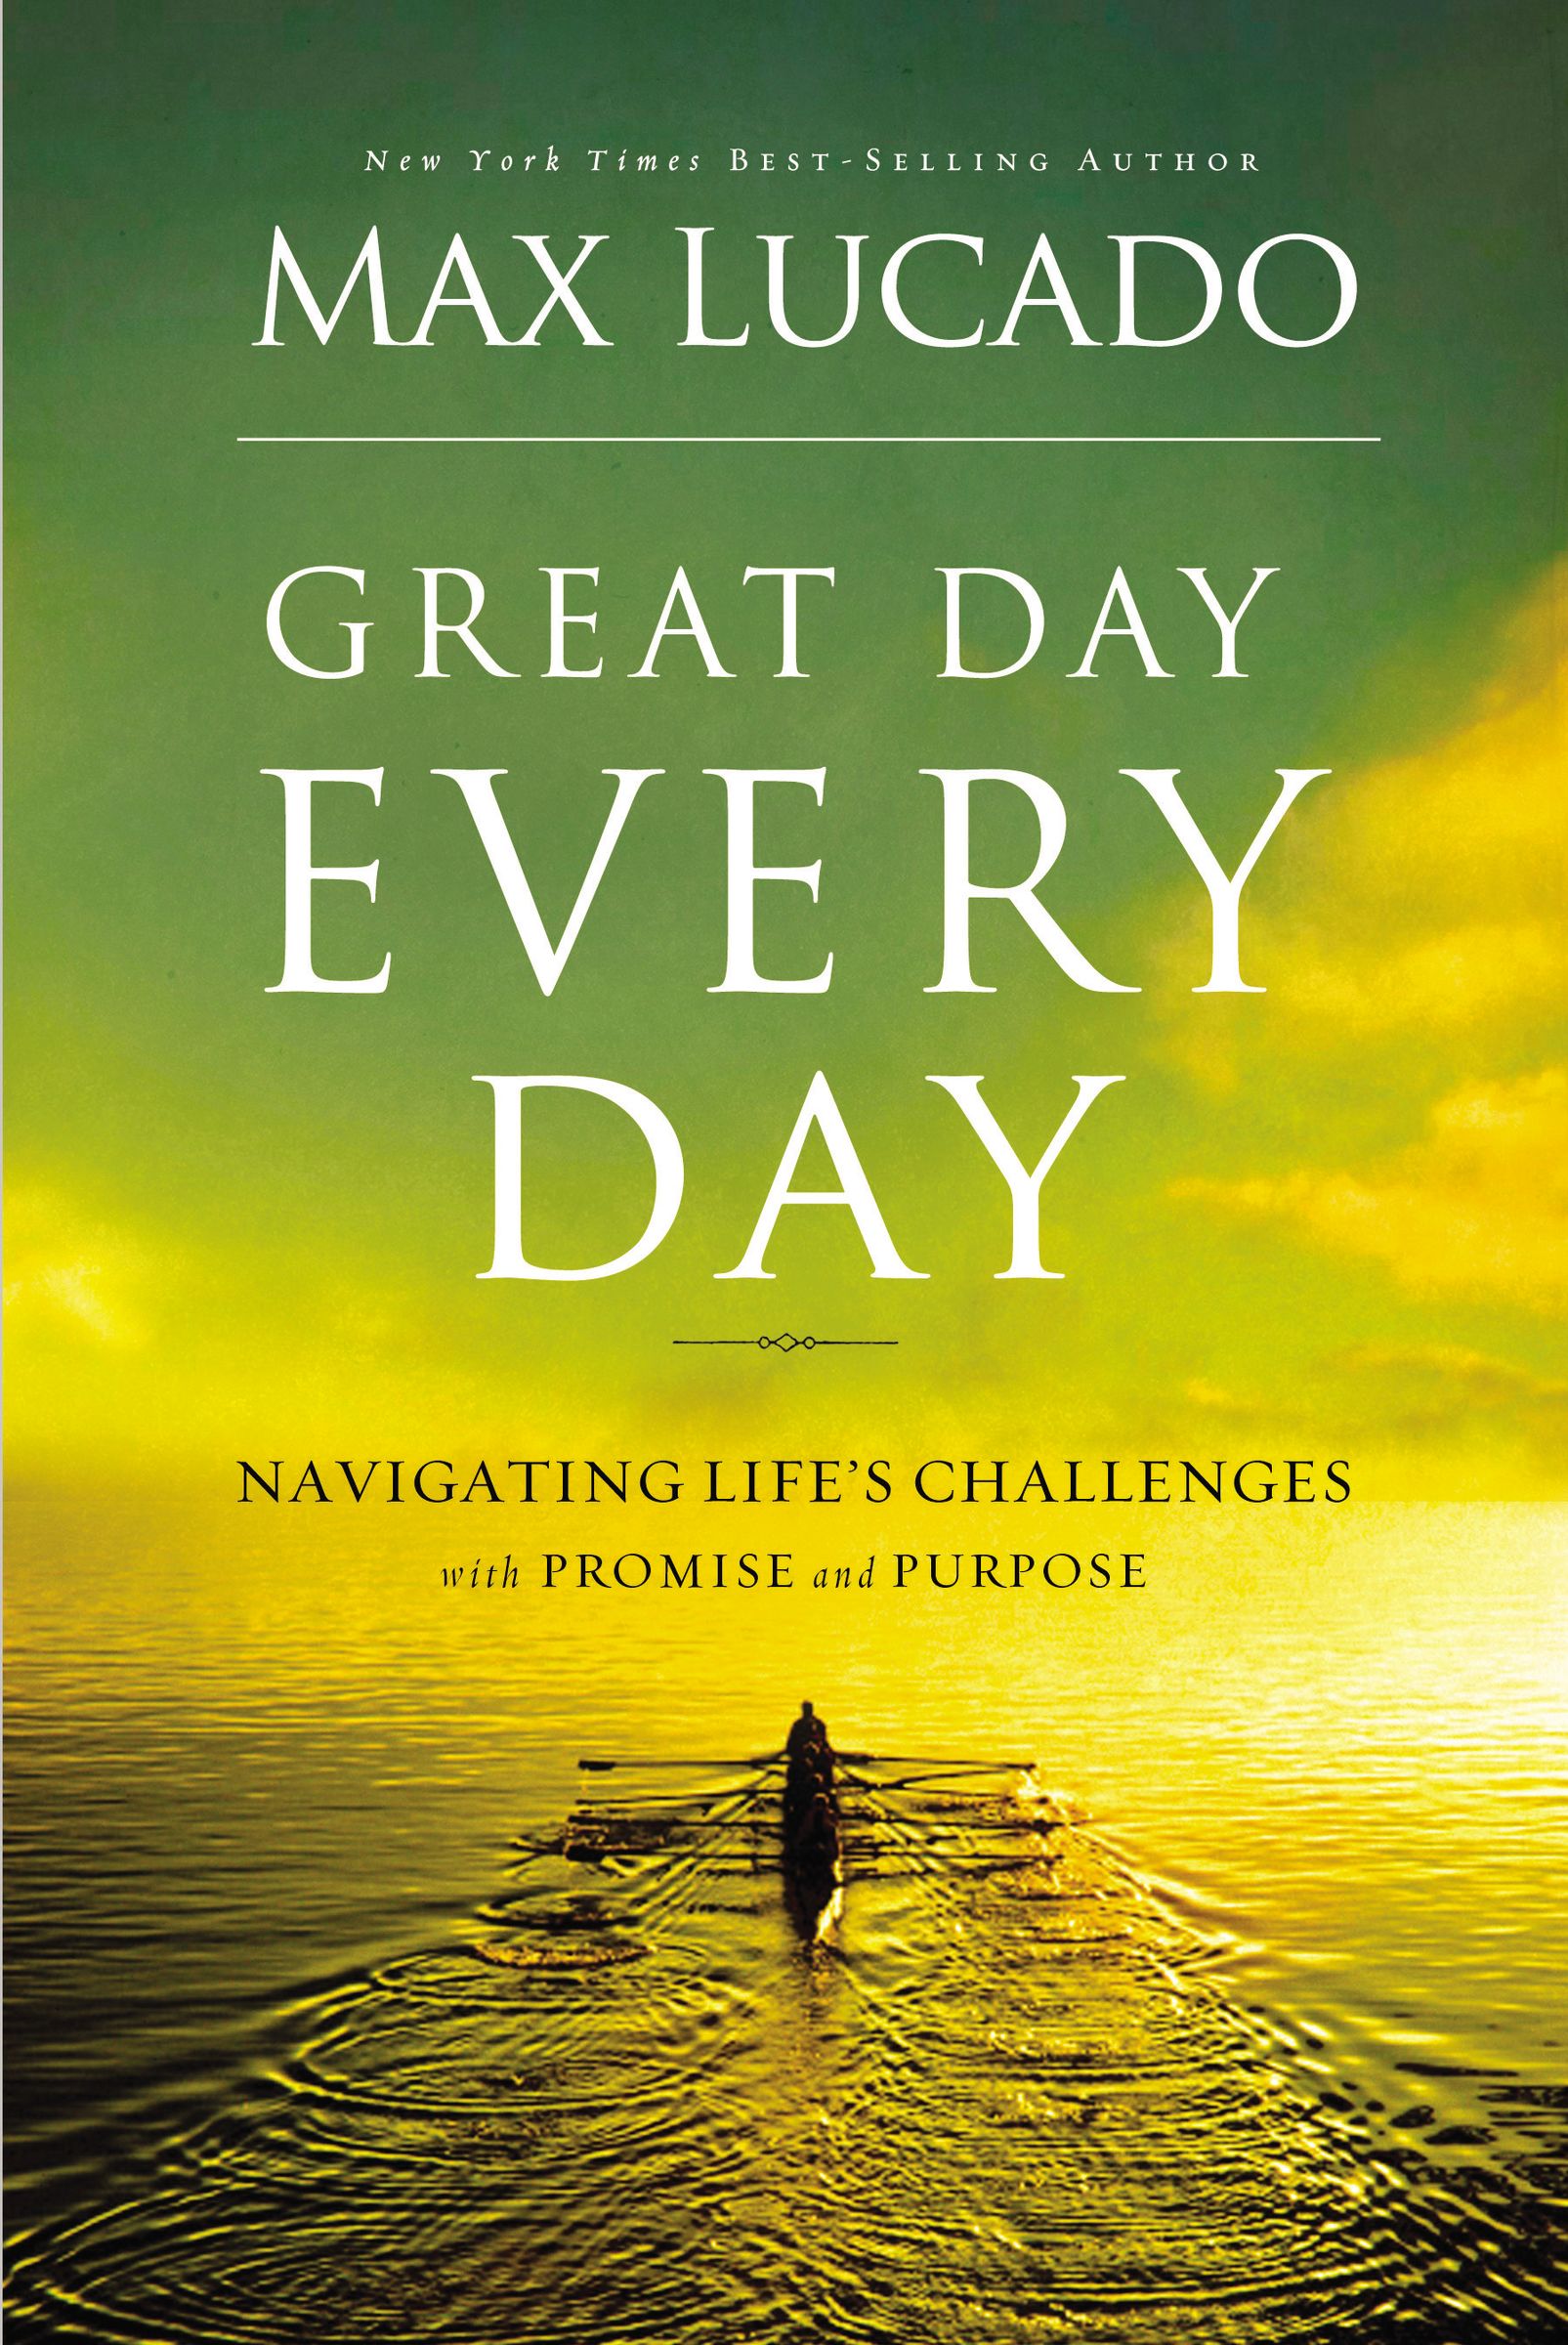 Image of Great Day Every Day other